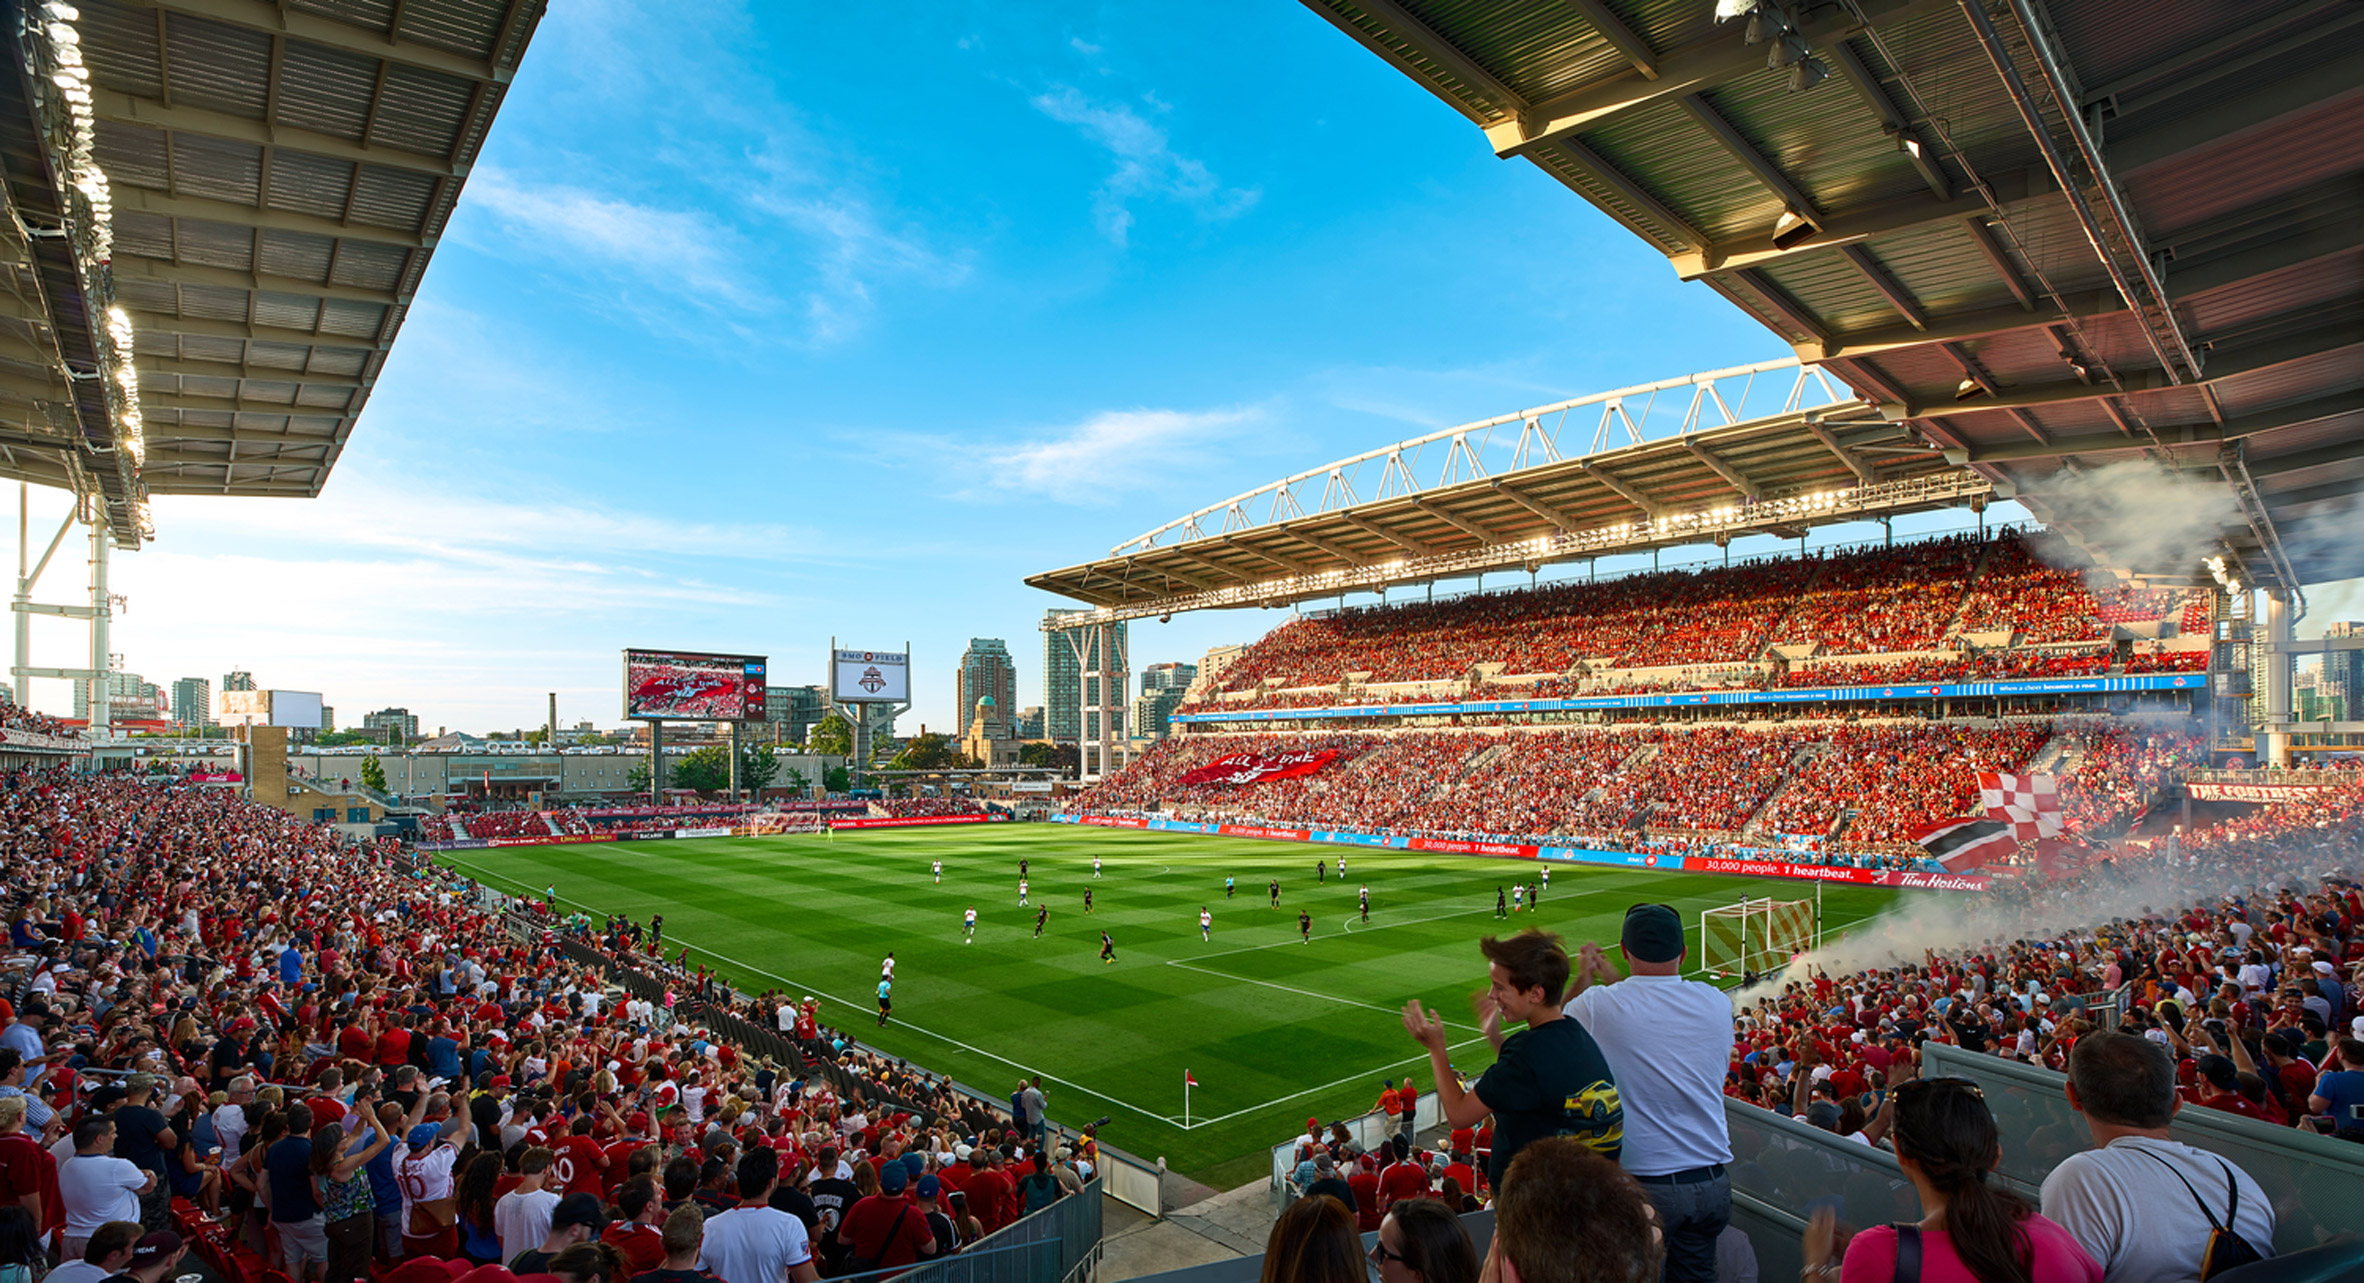 BMO Field expansion by Gensler